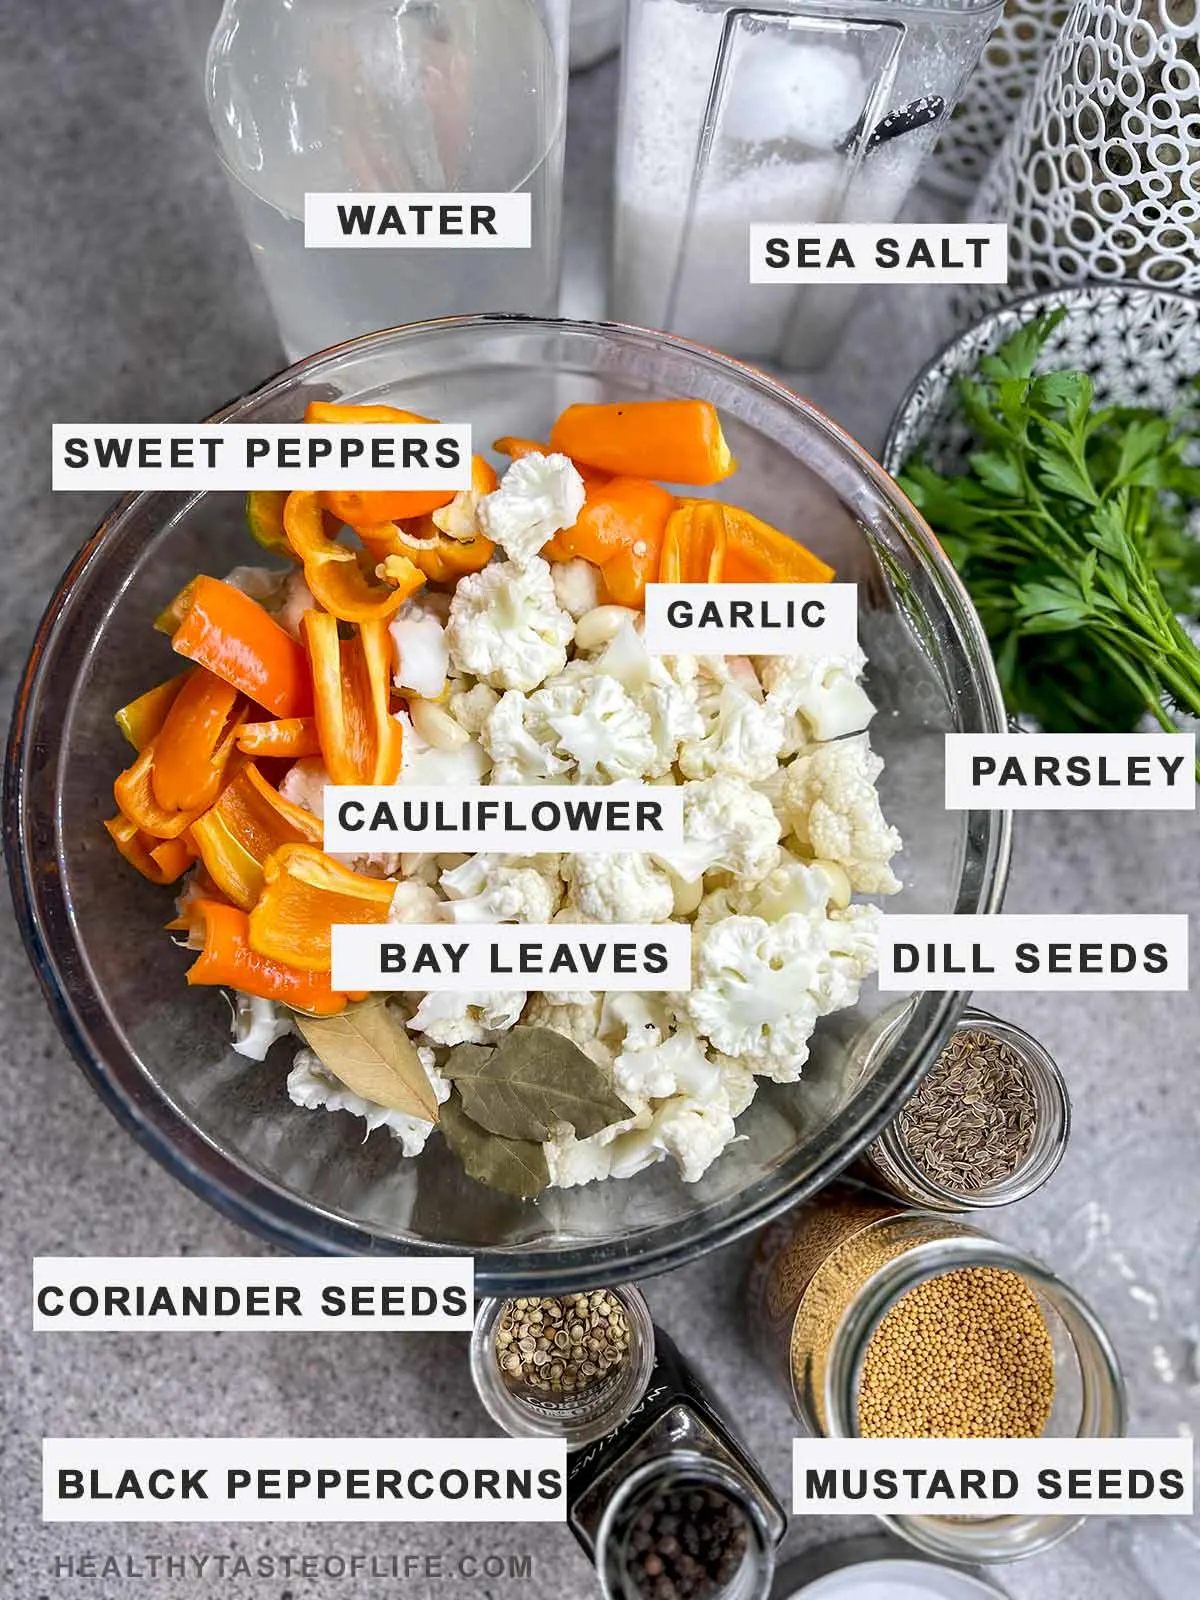 Ingredients needed to ferment cauliflower displayed on a table.